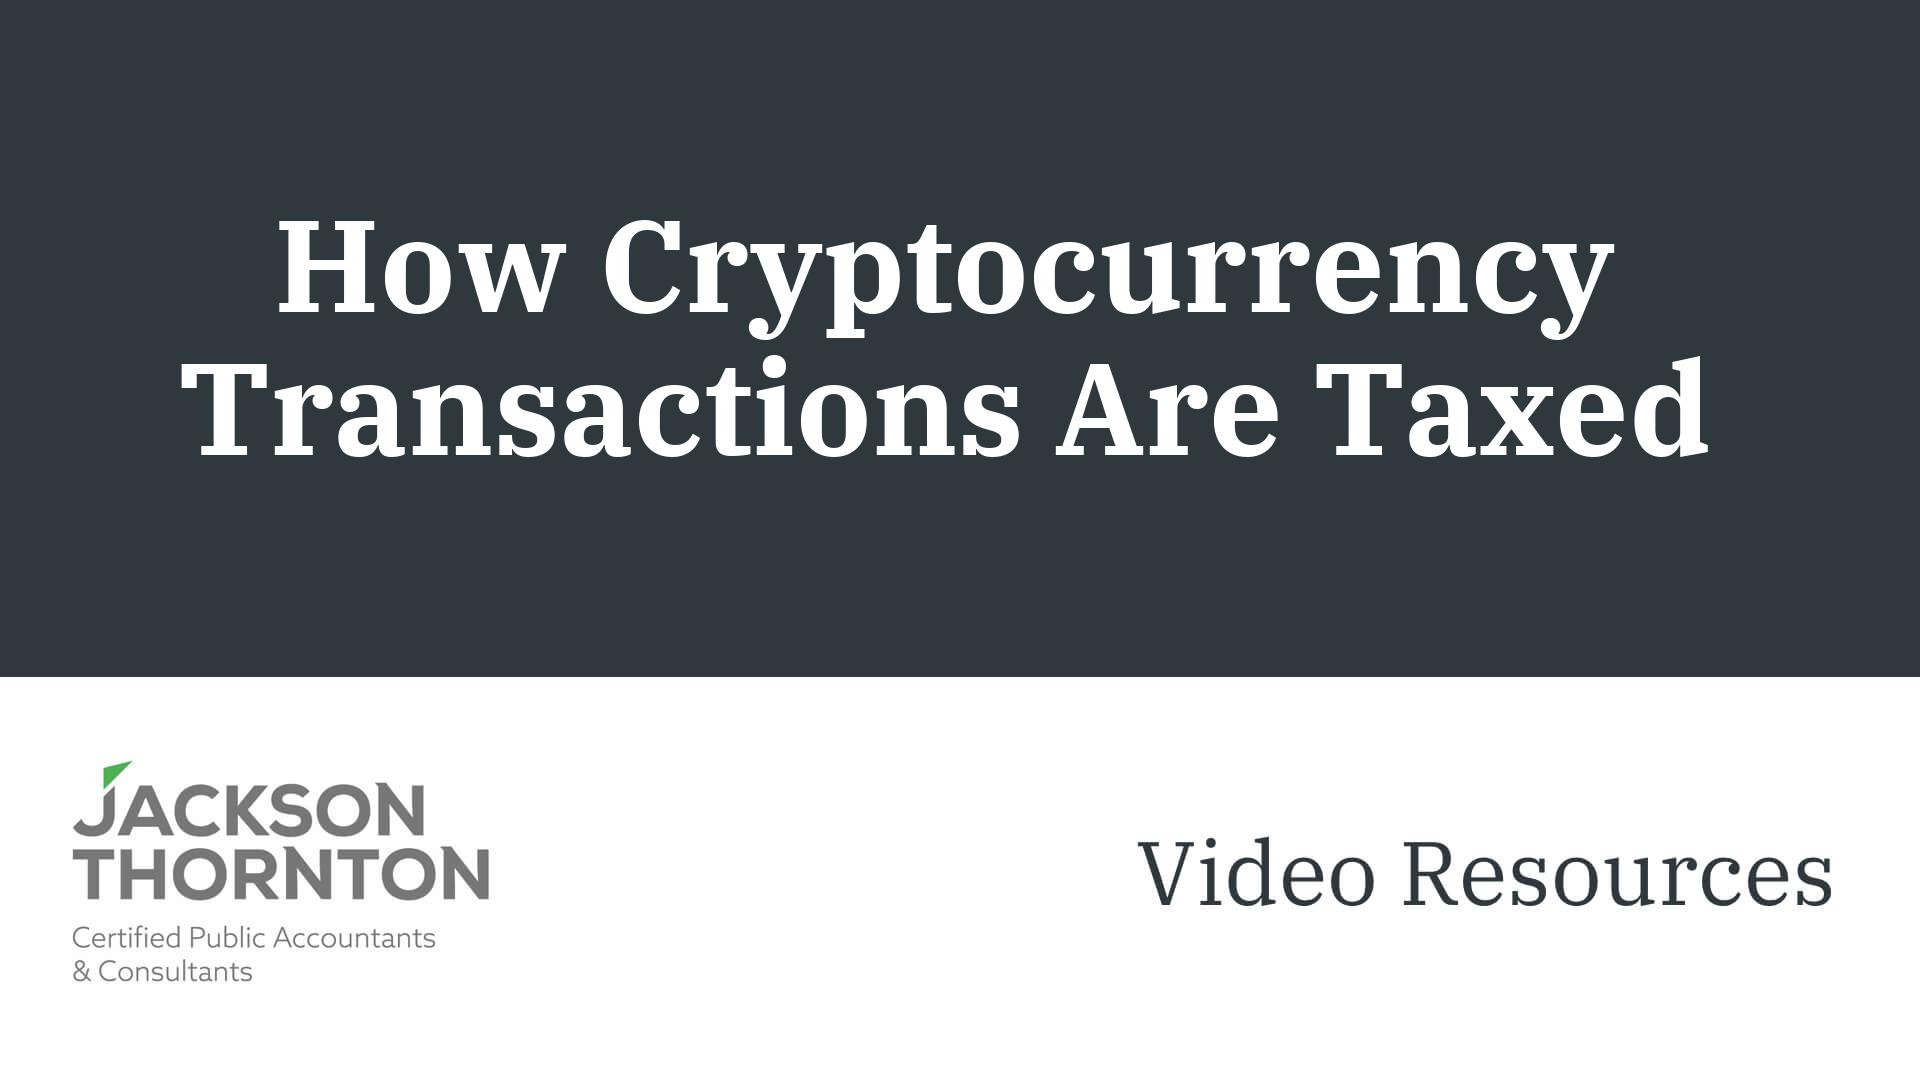 How Cryptocurrency Transactions Are Taxed